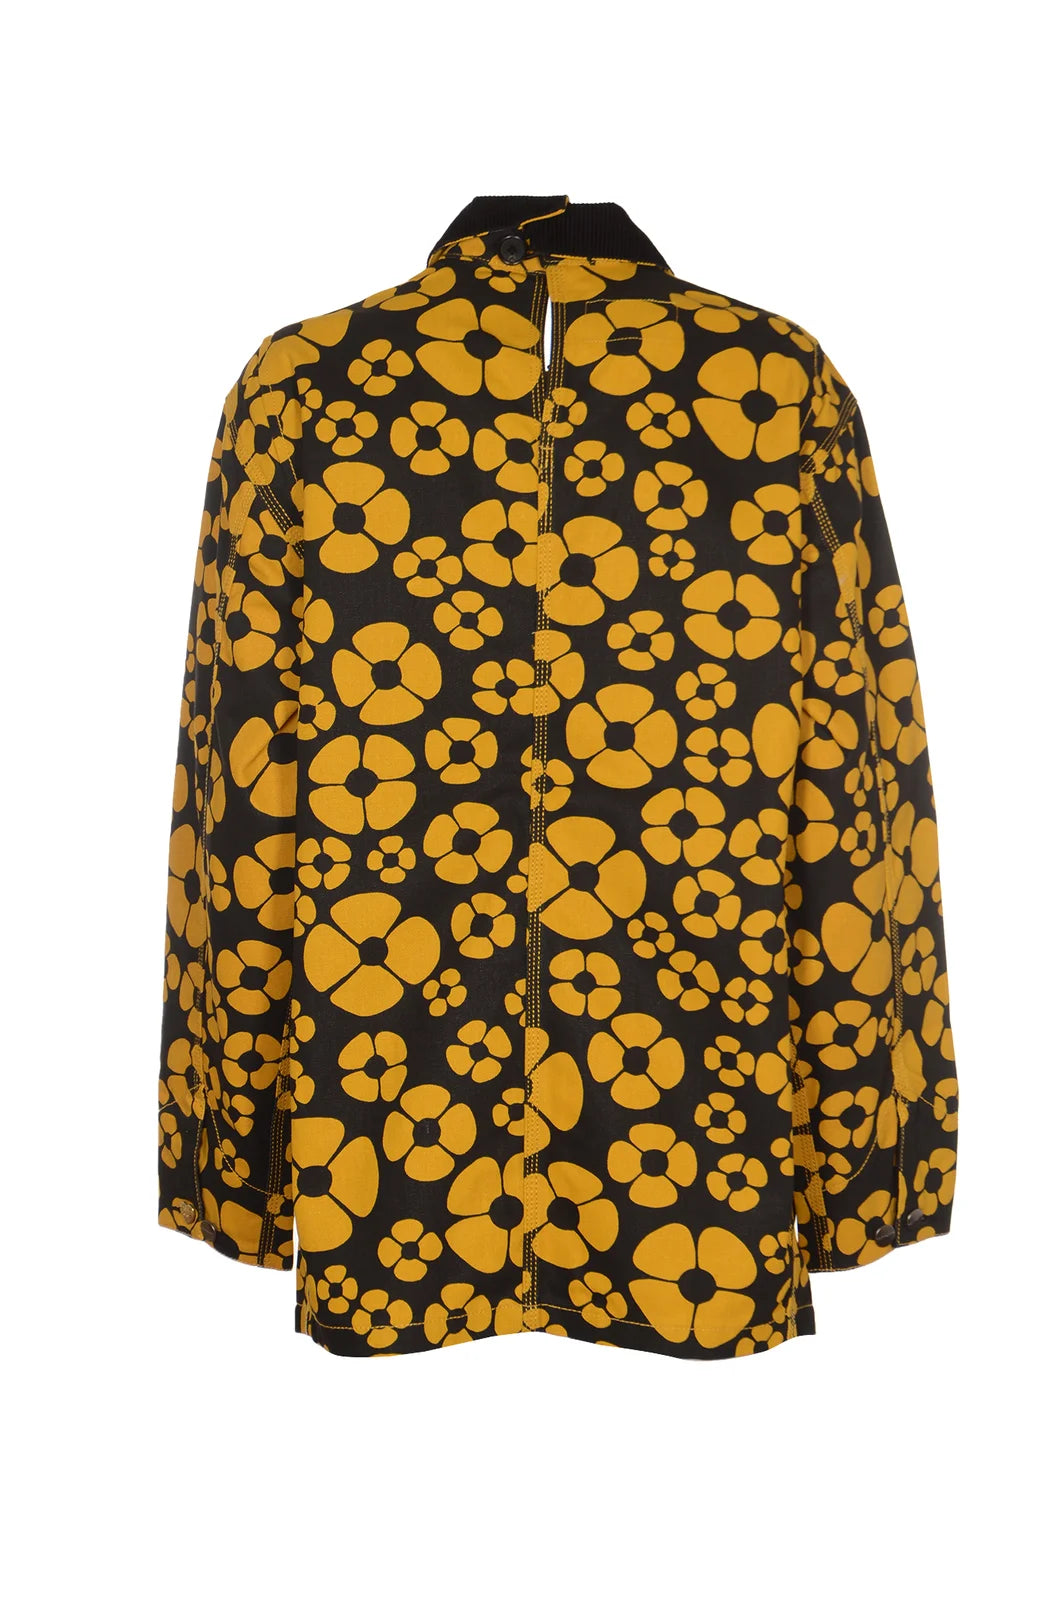 MARNI X CARHARTT FLORAL PRINTED BUTTONED OVERSHIRT JACKET